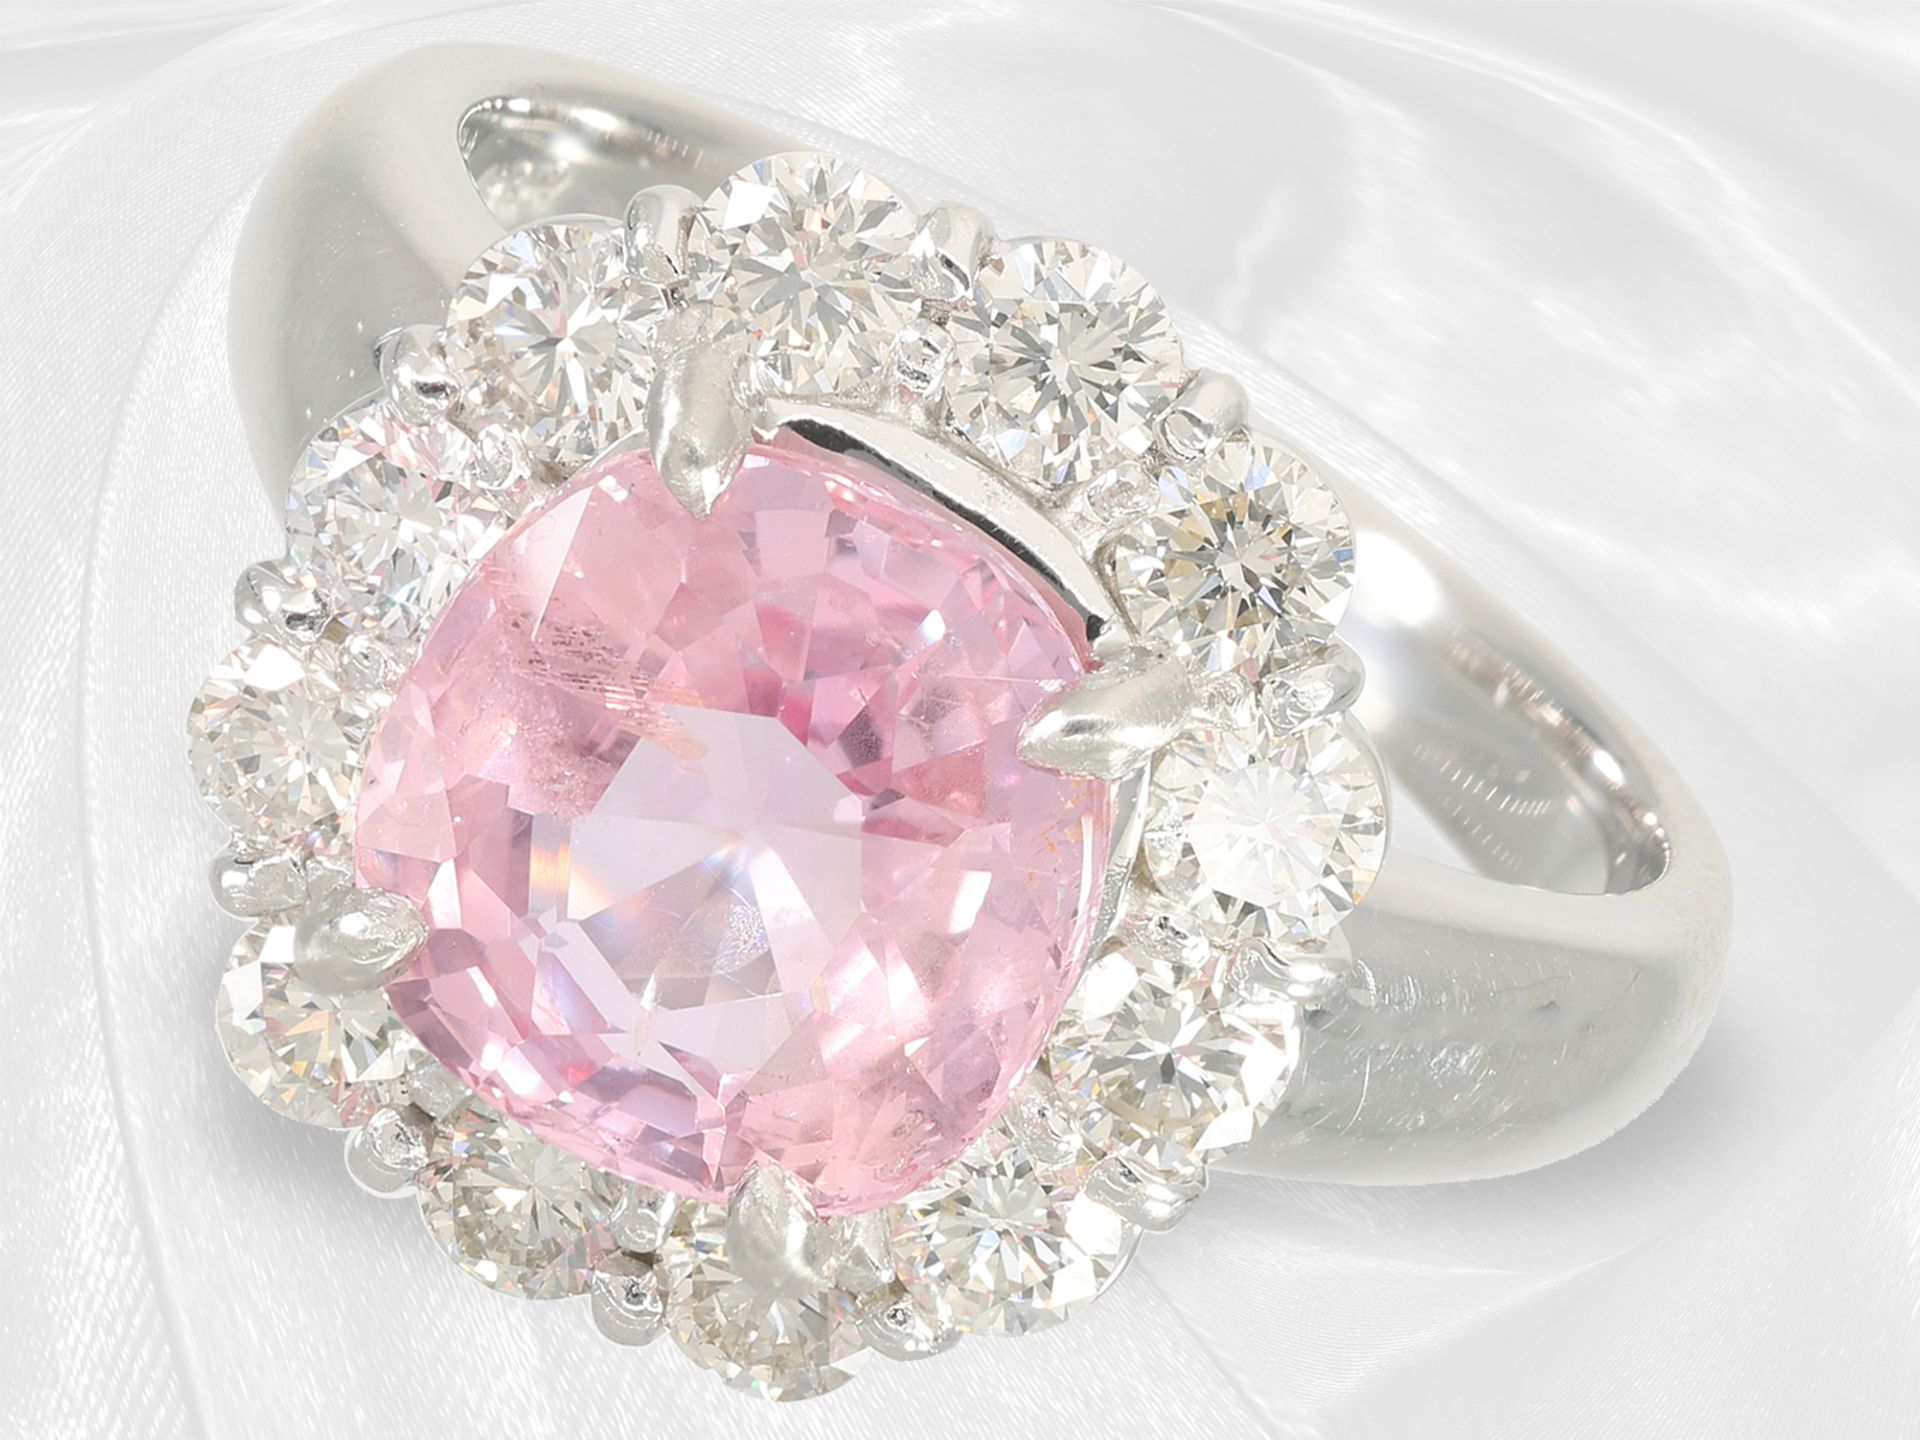 Ring: extremely high quality brilliant-cut diamond/sapphire ring with certified "NO HEAT Padparadsch - Image 5 of 9